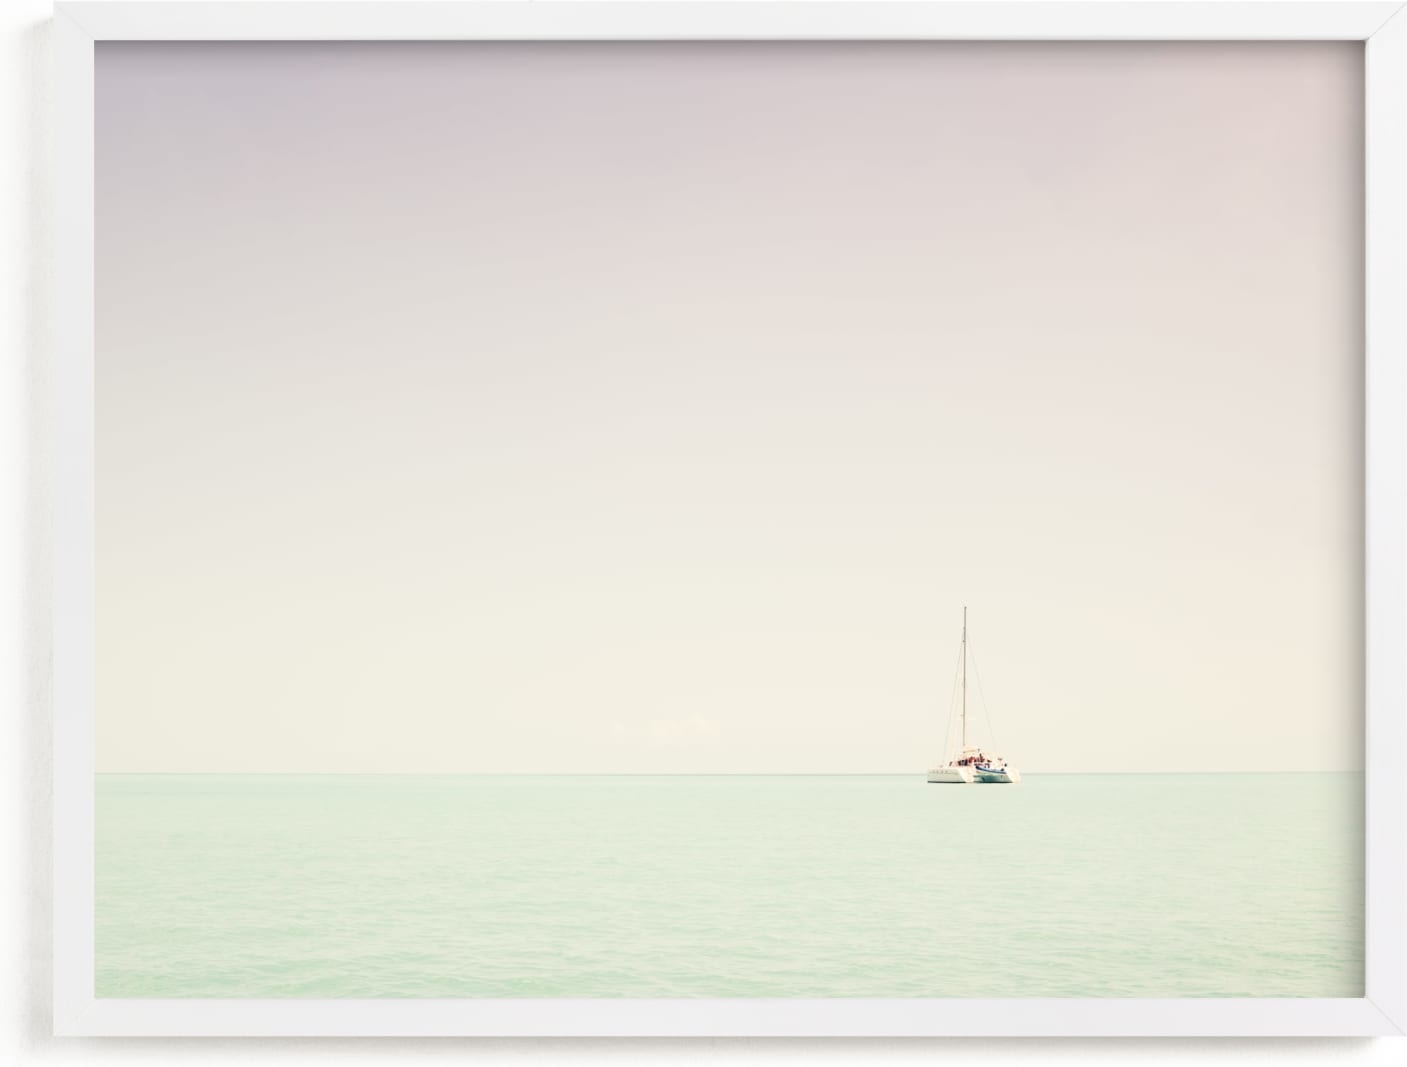 This is a pink art by Tommy Kwak called Catamaran 2 (Turks and Caicos).